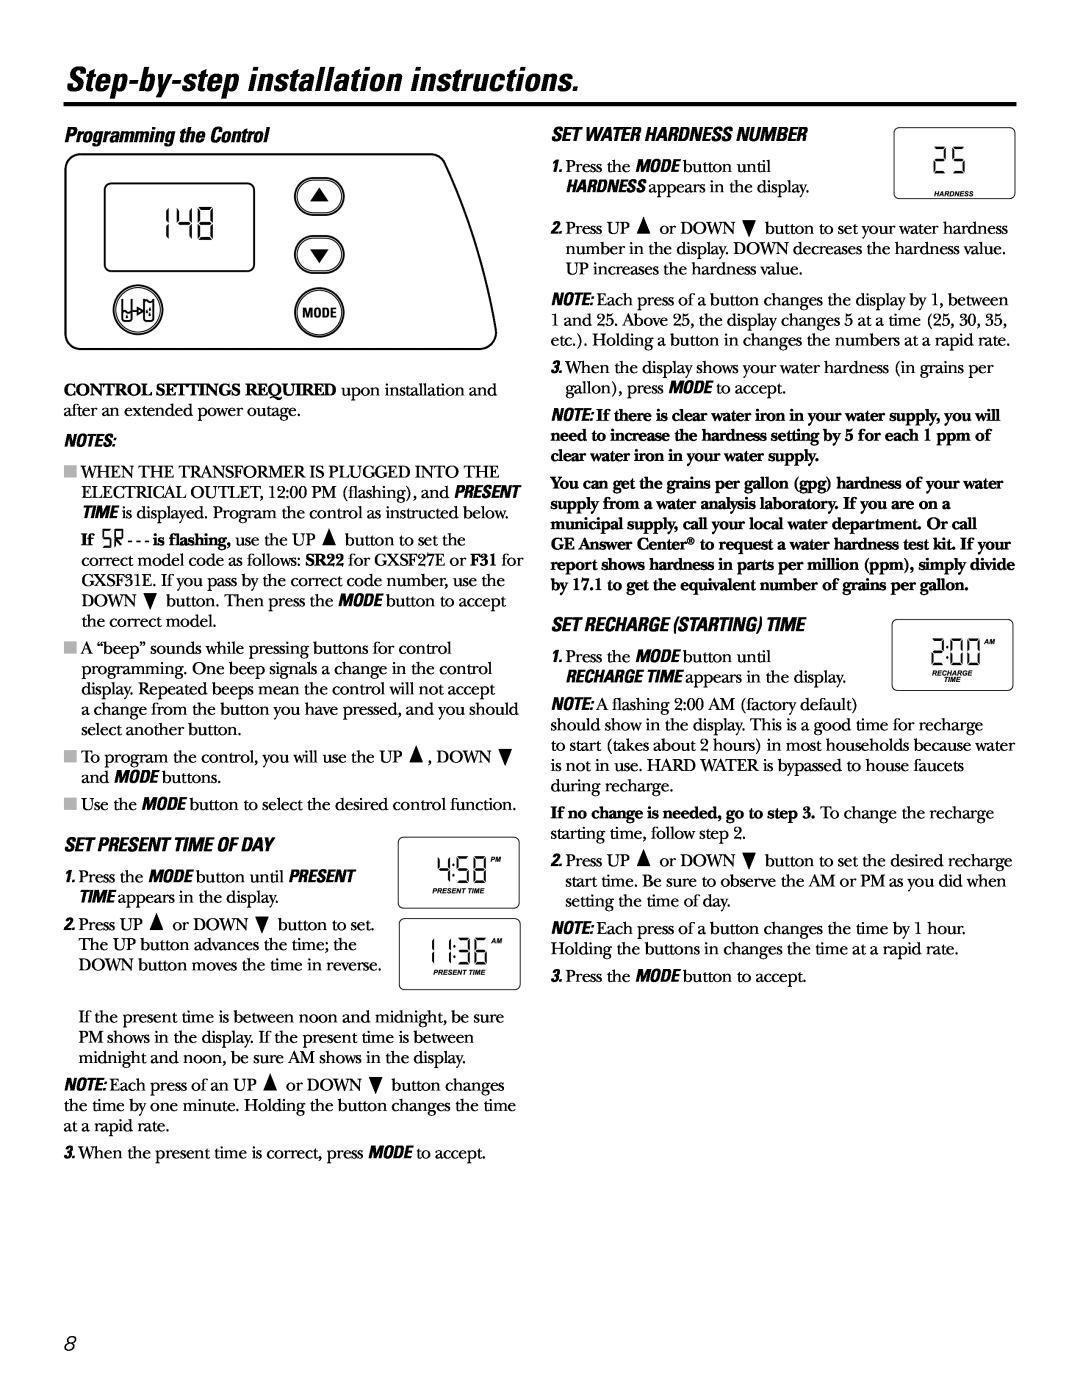 GE GXSF31E Step-by-step installation instructions, Programming the Control, Set Present Time Of Day 